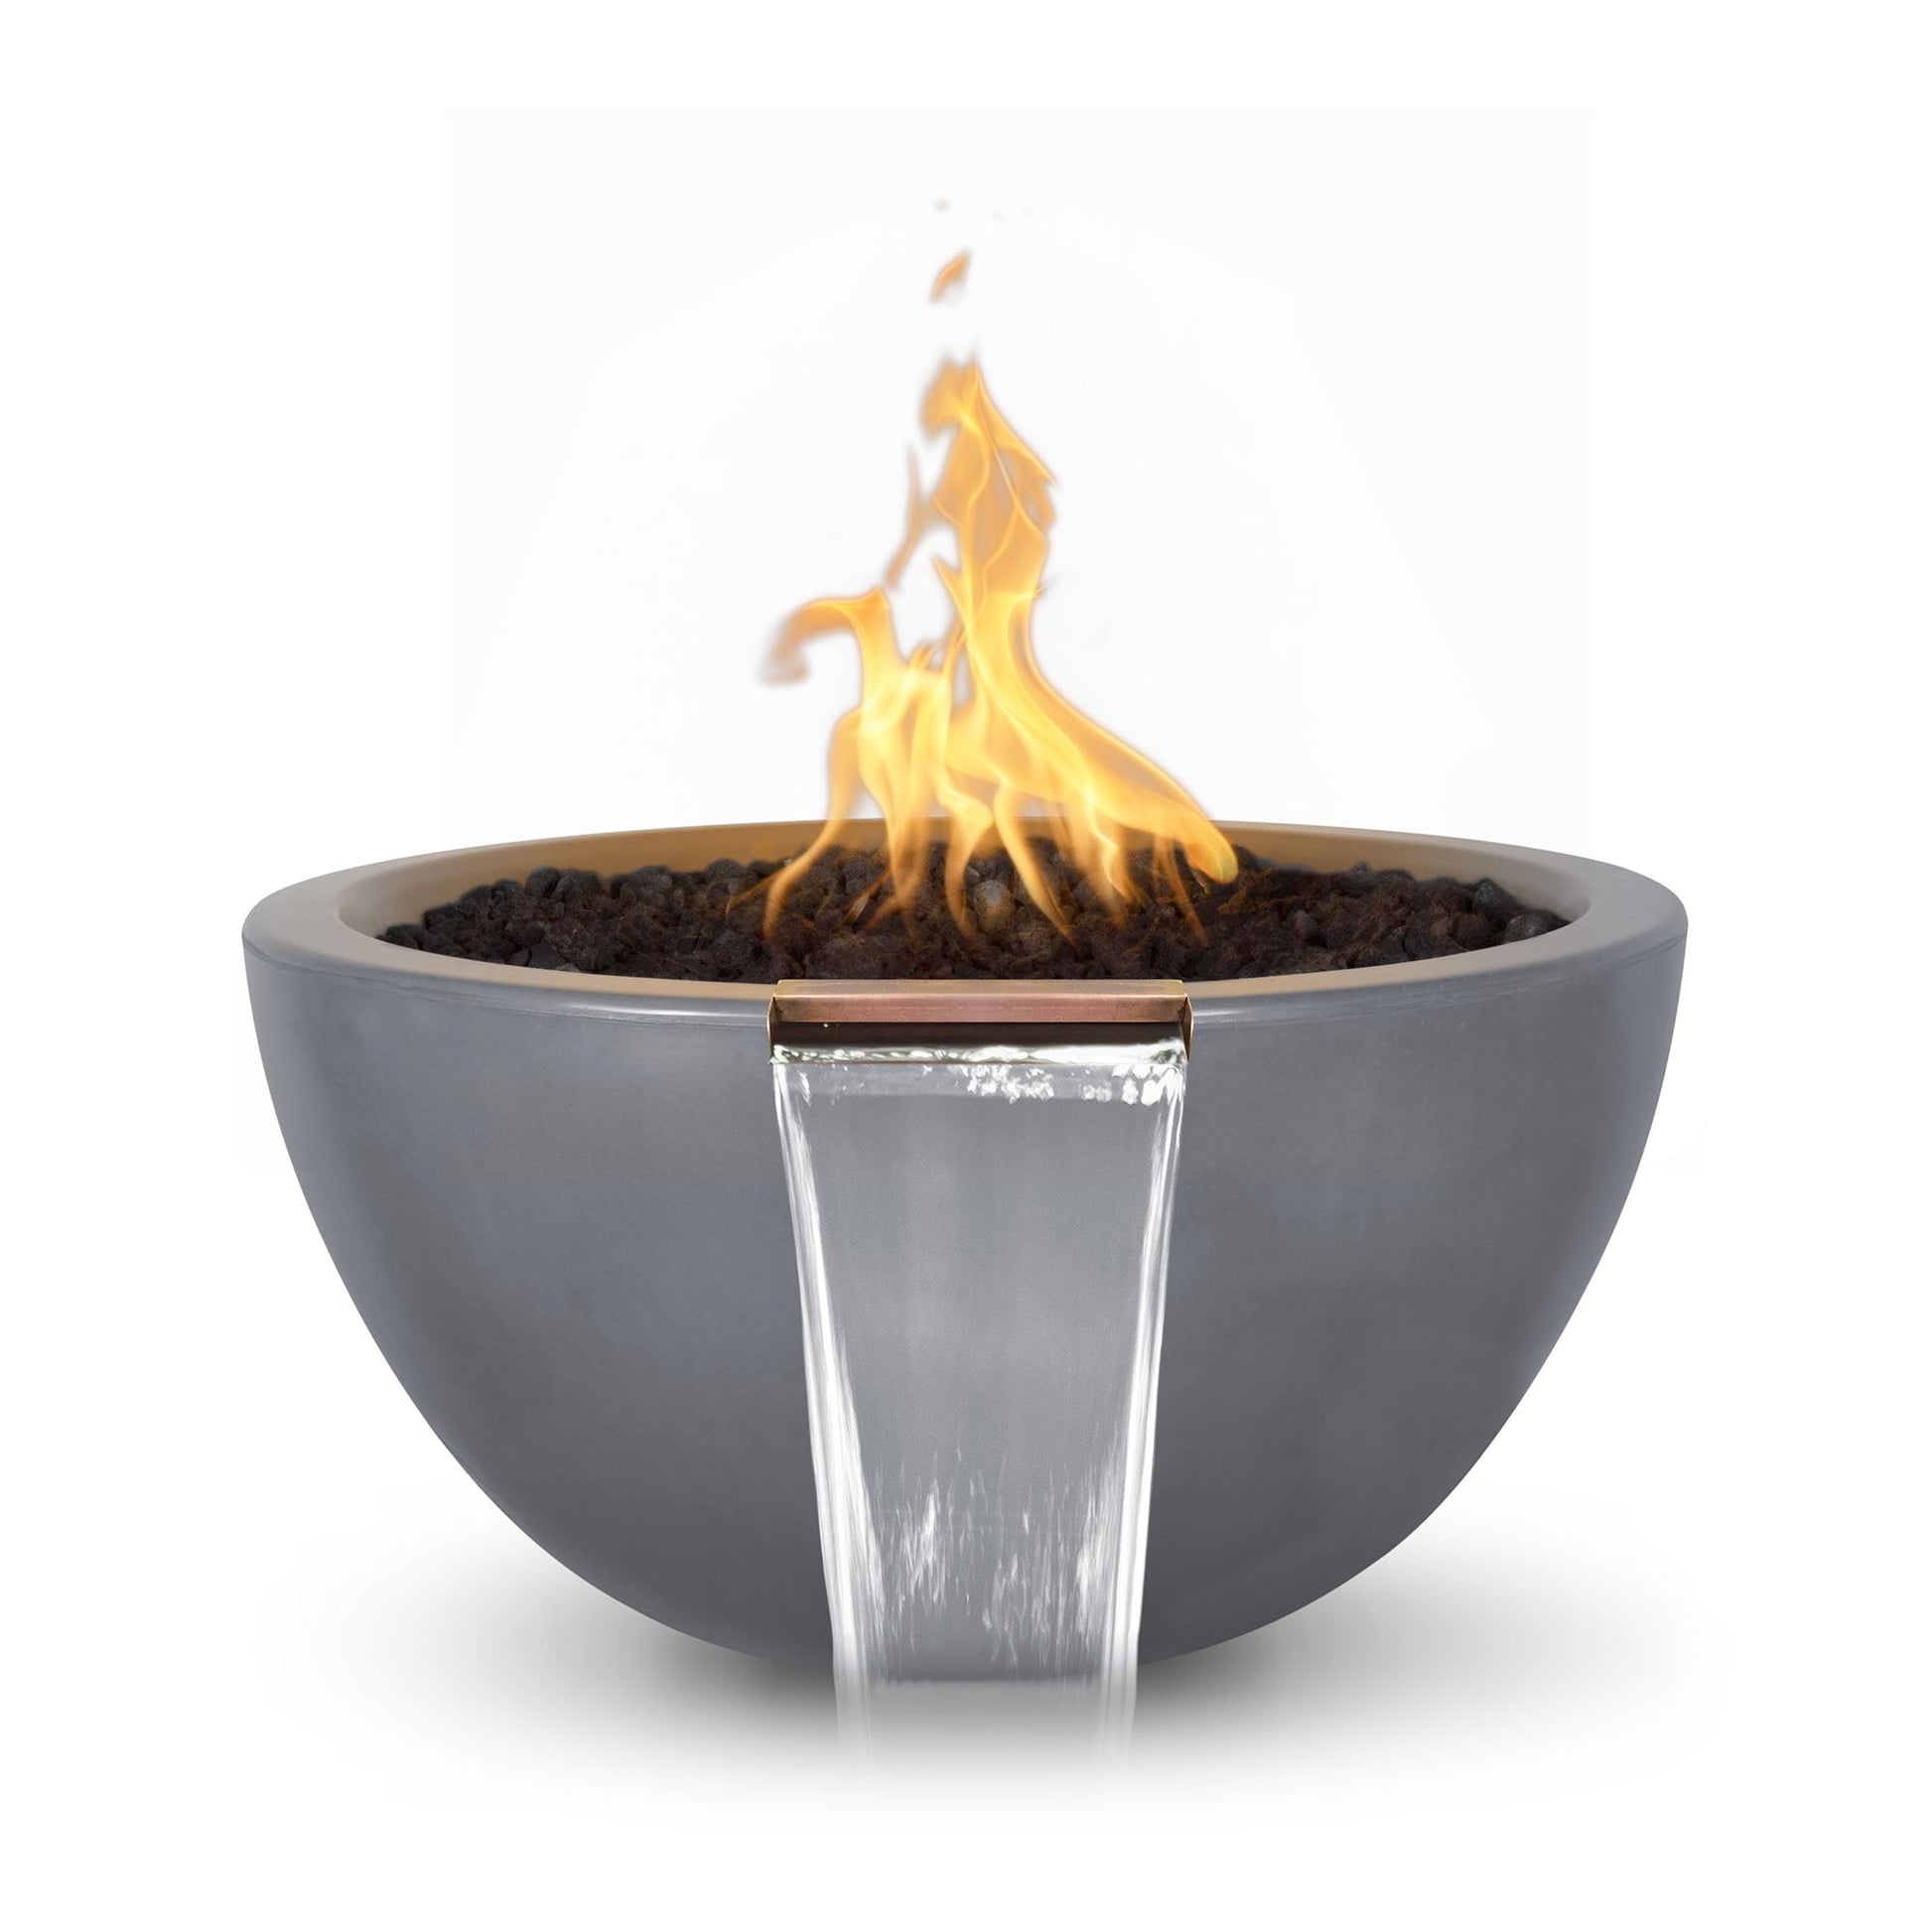 The Outdoor Plus Round Luna 38" Rustic Moss Stone GFRC Concrete Liquid Propane Fire & Water Bowl with Match Lit with Flame Sense Ignition